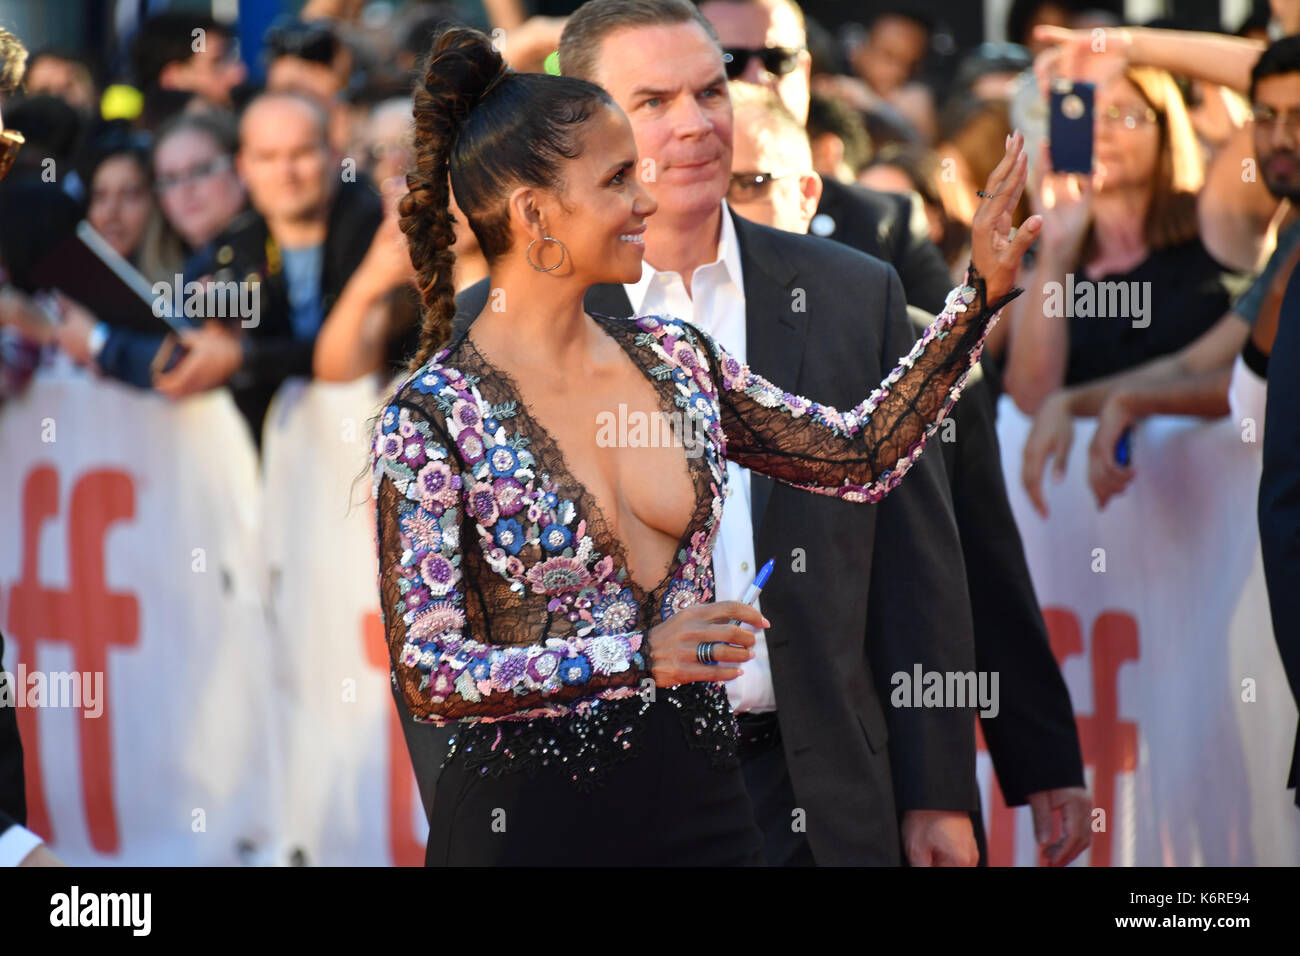 Toronto, Ontario, Canada. 13th Sep, 2017. Actress HALLE BERRY attends 'KING13' premiere during the 2017 Toronto International Film Festival at Roy Thomson Hall on September 8, 2017 in Toronto, Canada Credit: Igor Vidyashev/ZUMA Wire/Alamy Live News Stock Photo